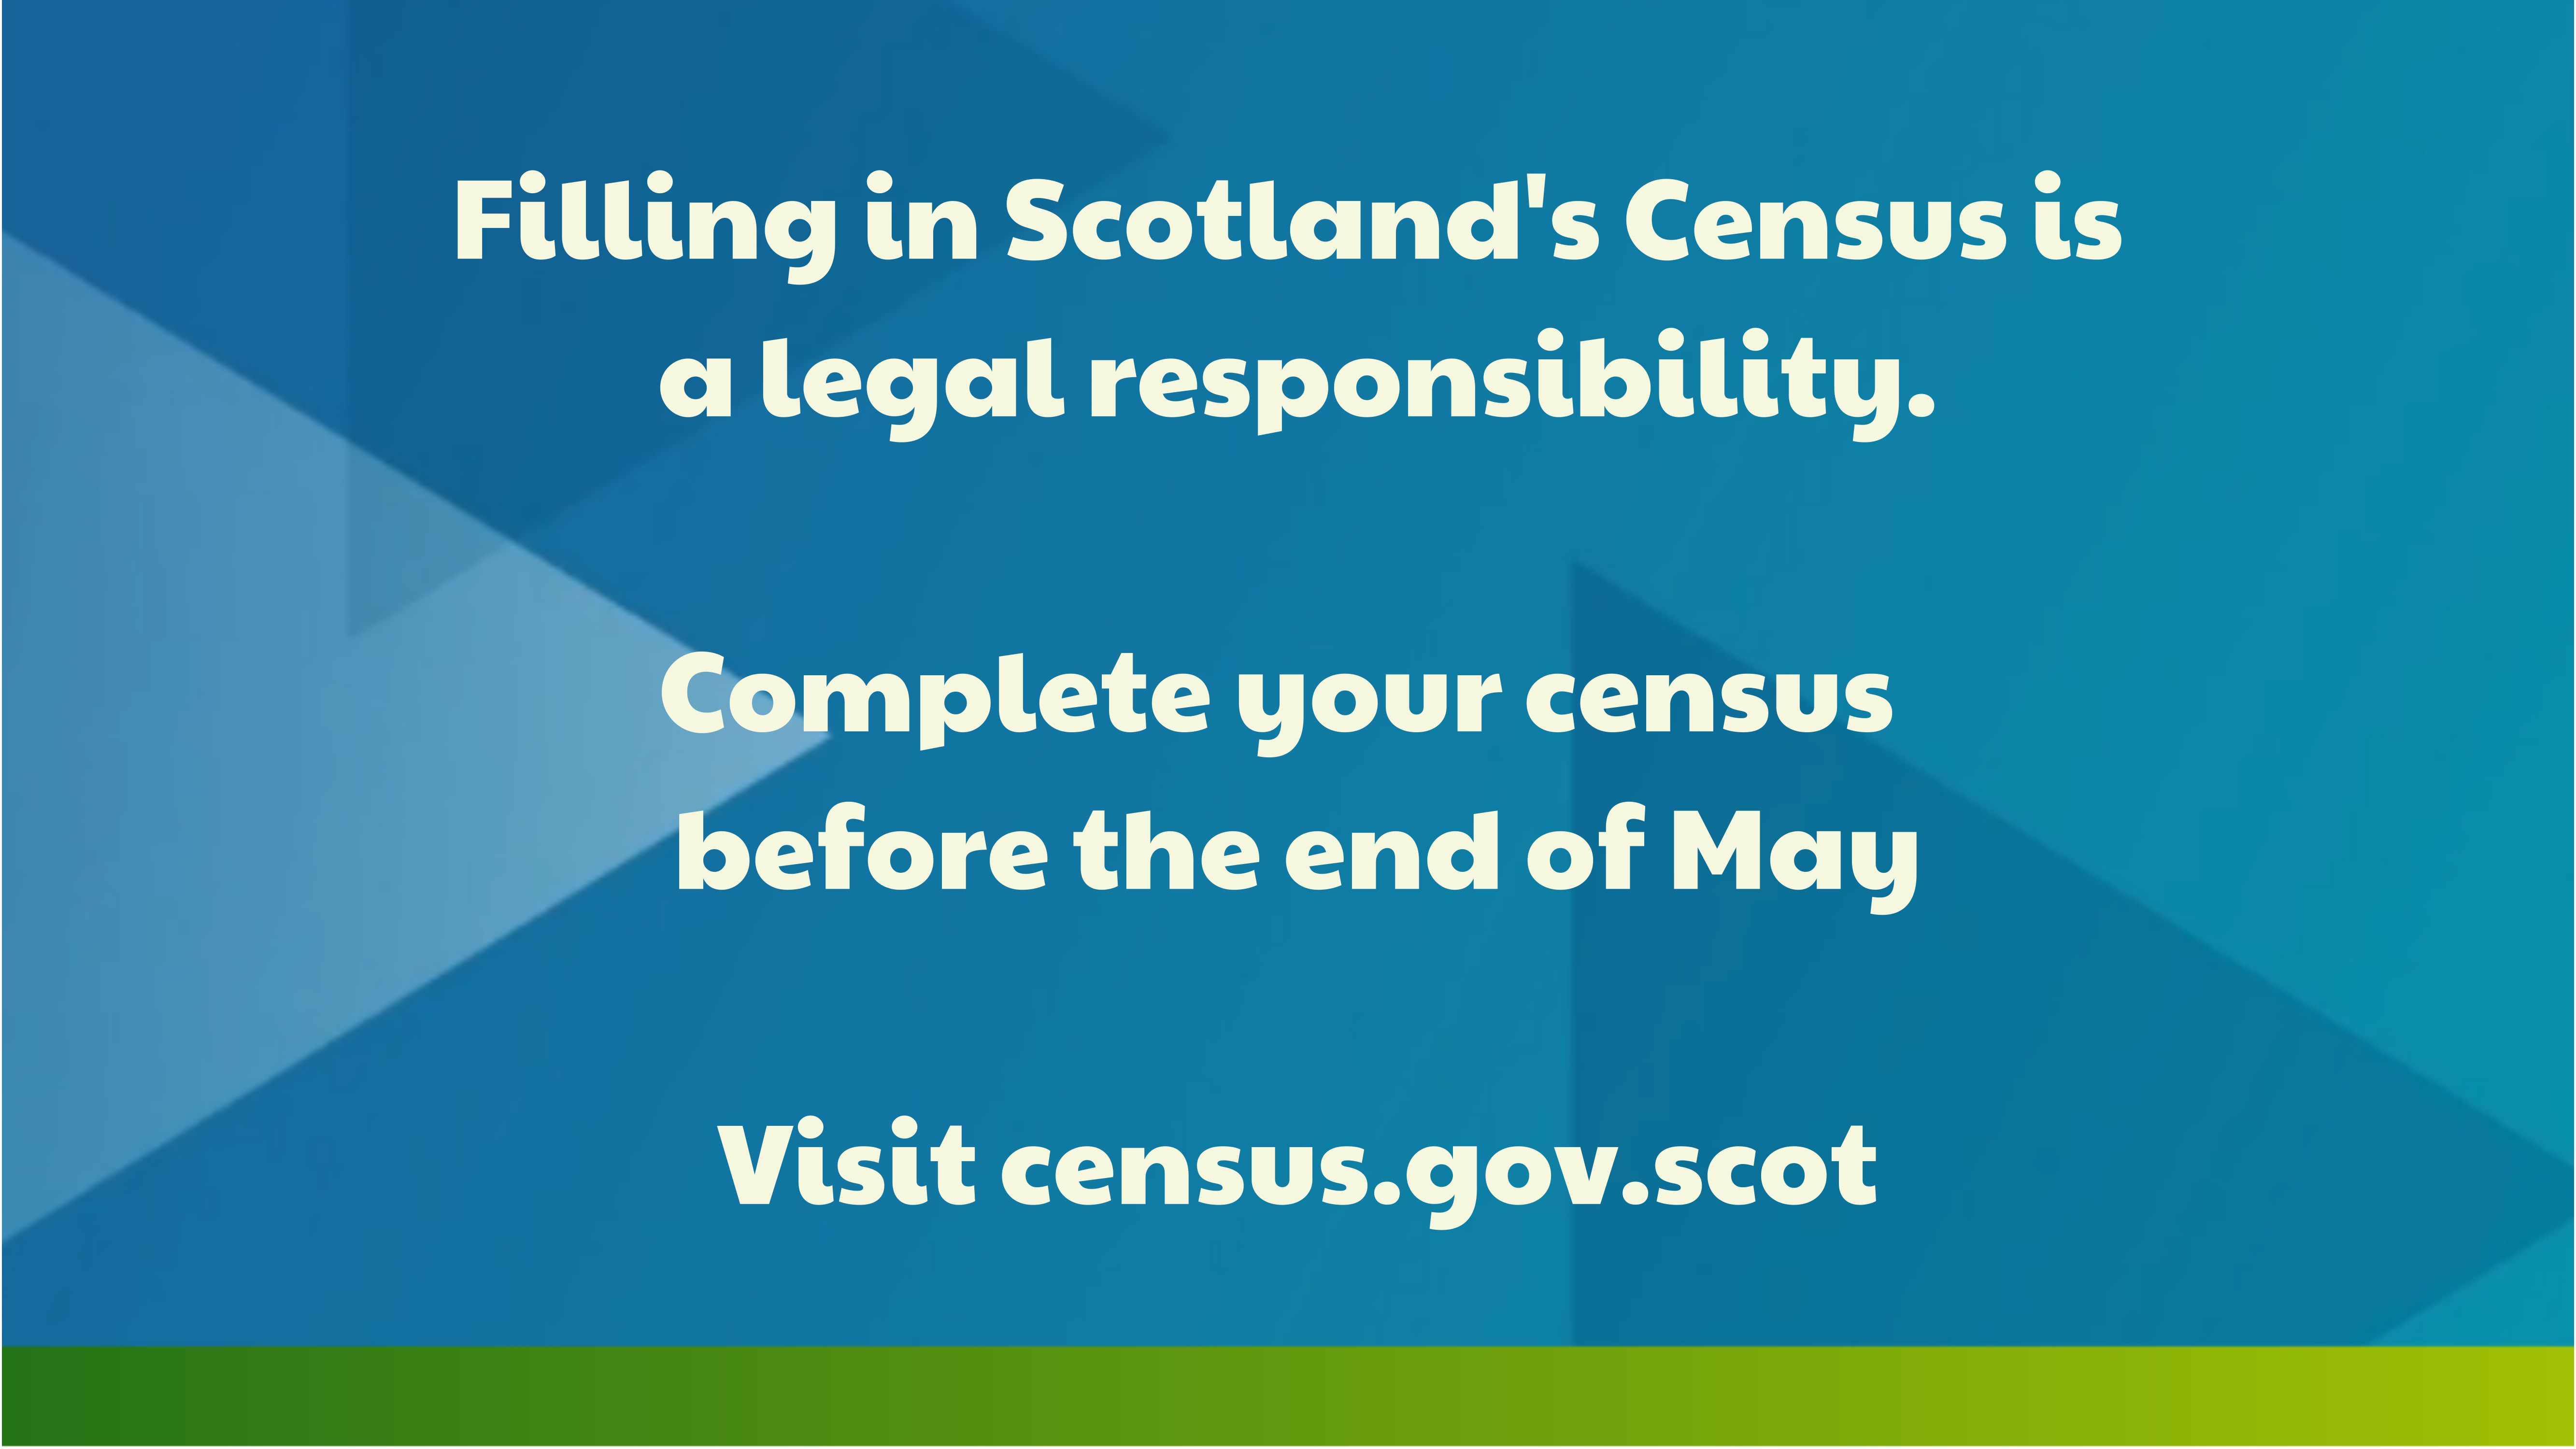 Fillin in Scotland's Census is a legal responsibility. Coplete your census before the end of May. Visit census.gov.scot